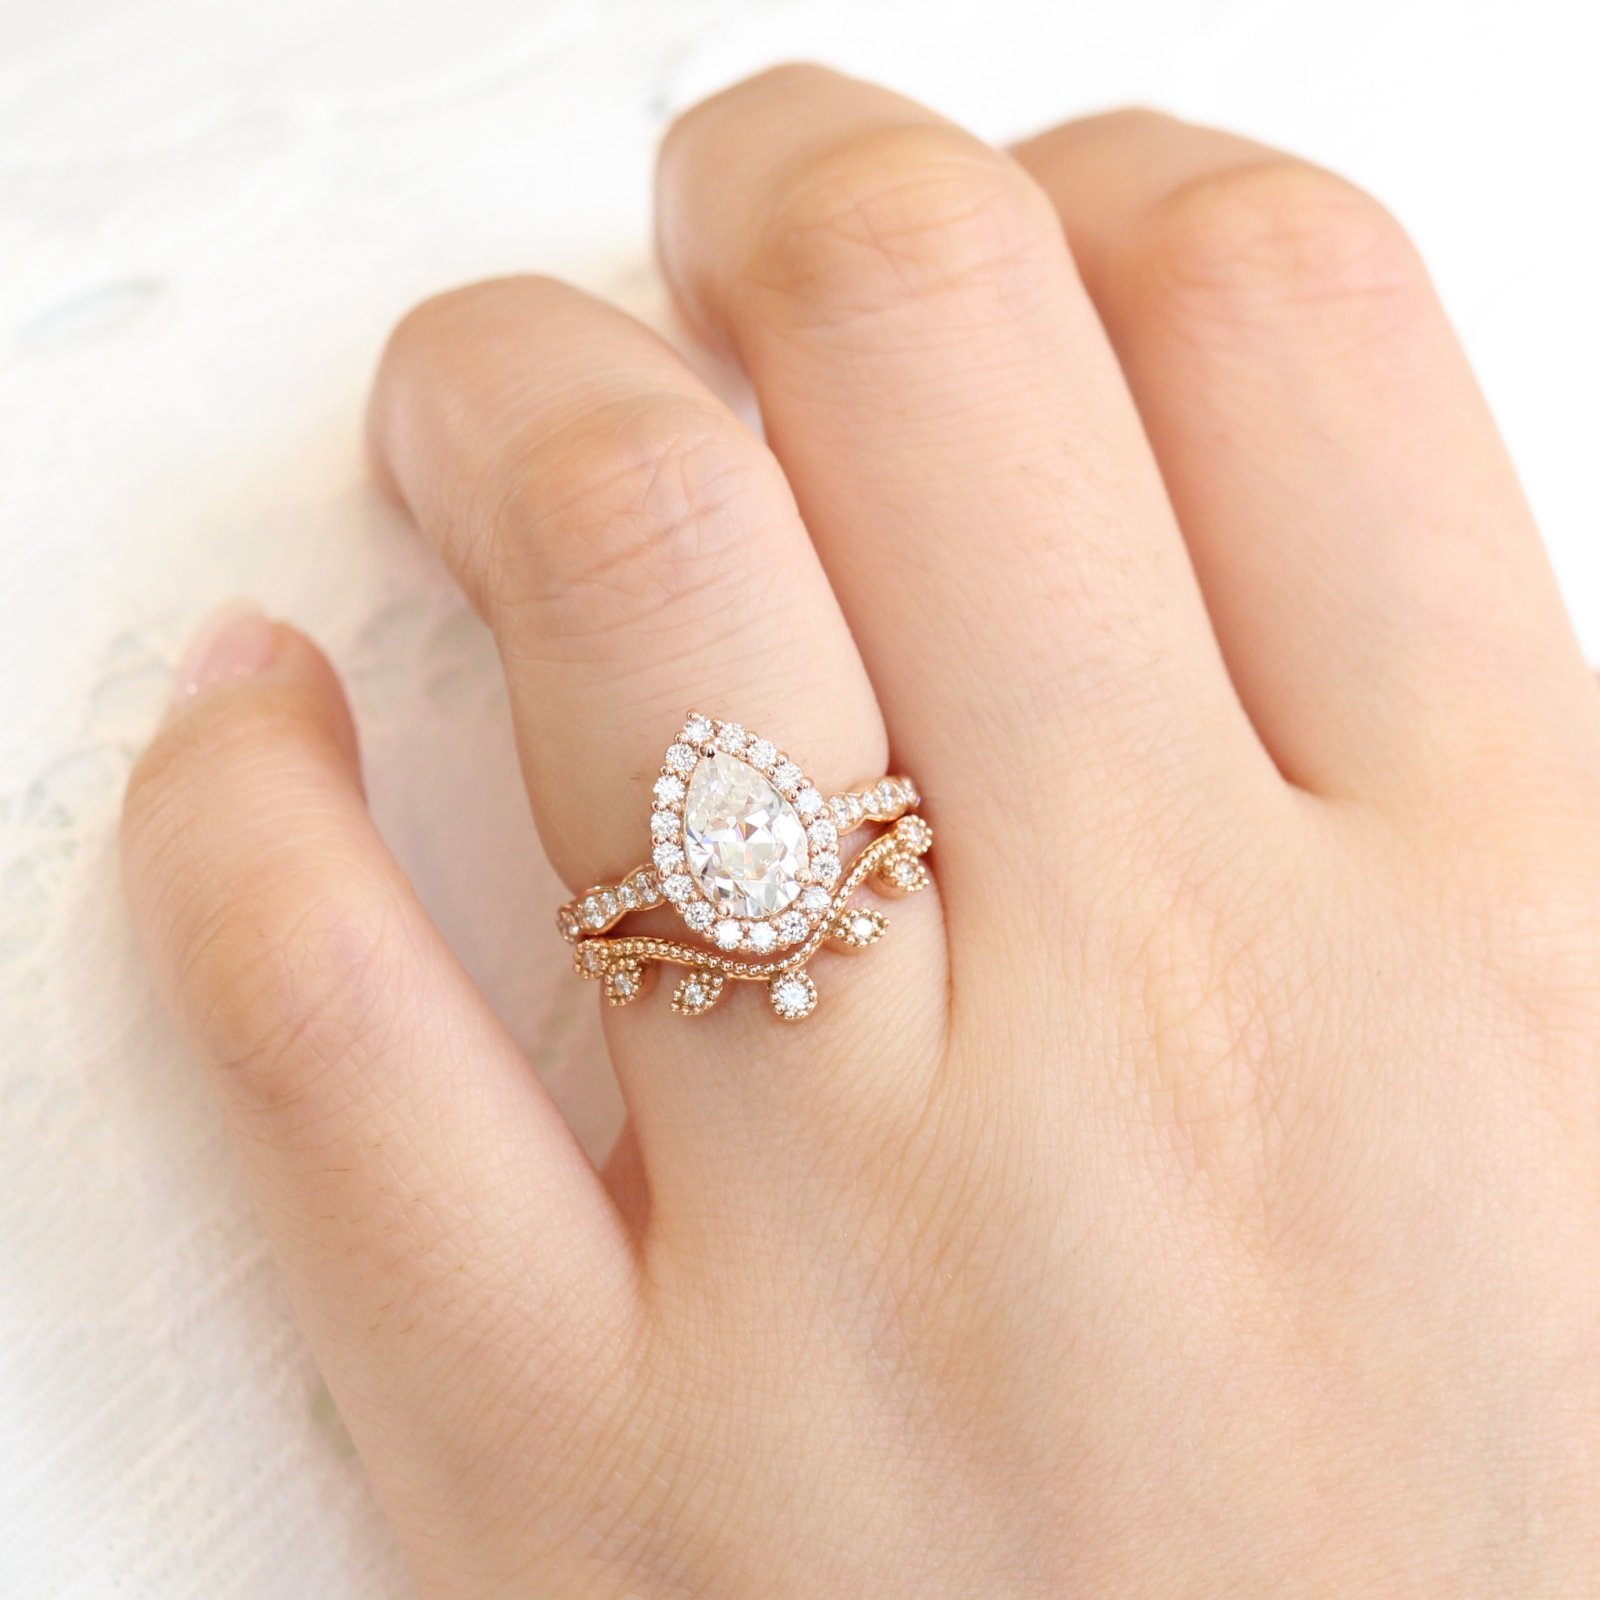 Pear shaped (teardrop) engagement ring ideas: Rose gold halo diamond on a scalloped band setting, pairing beautifully with a curved leaf diamond wedding band. // mysweetengagement.com